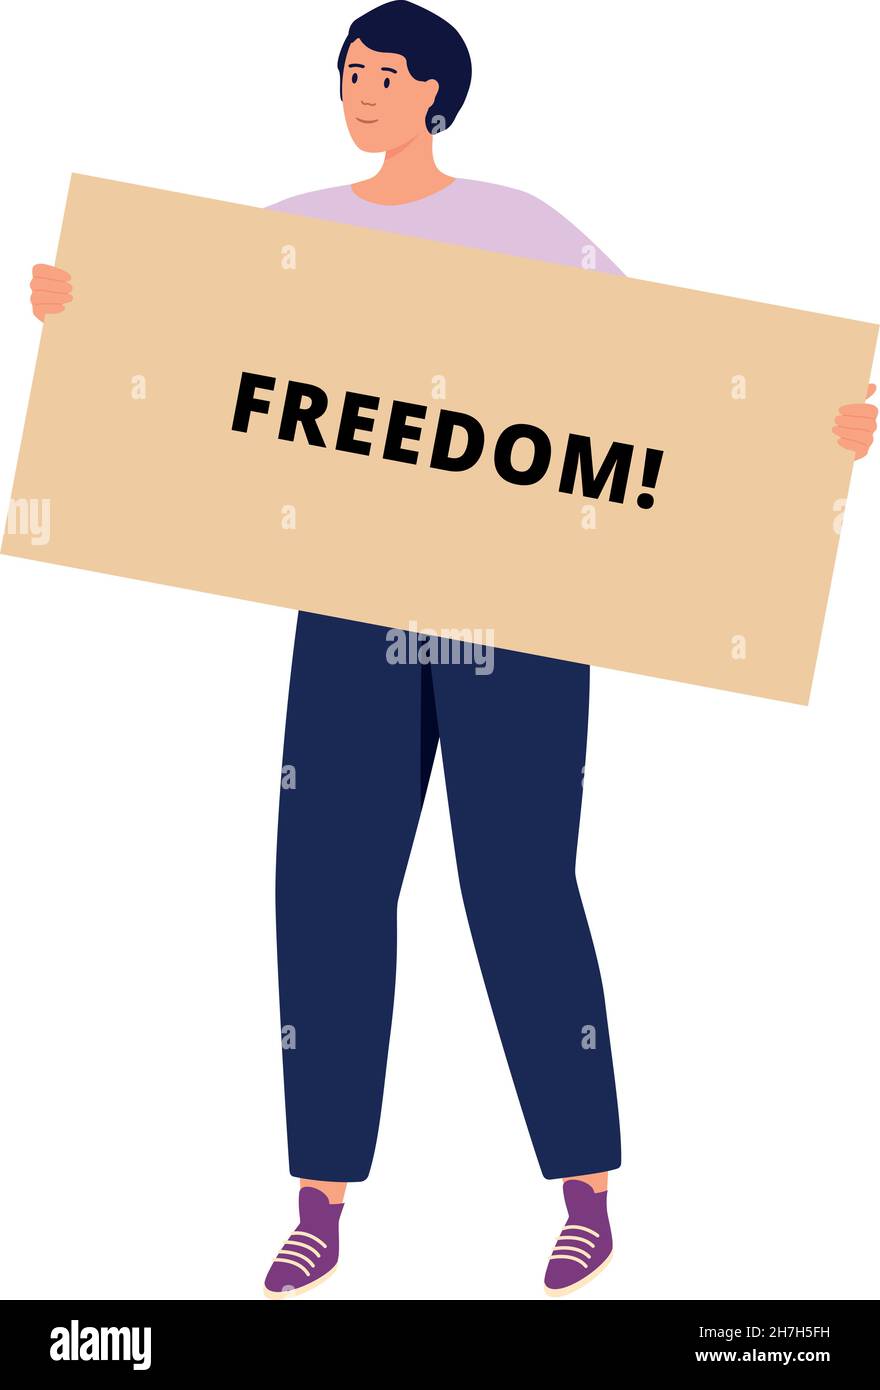 Guy holding freedom banner. Man protesting for human rights Stock Vector